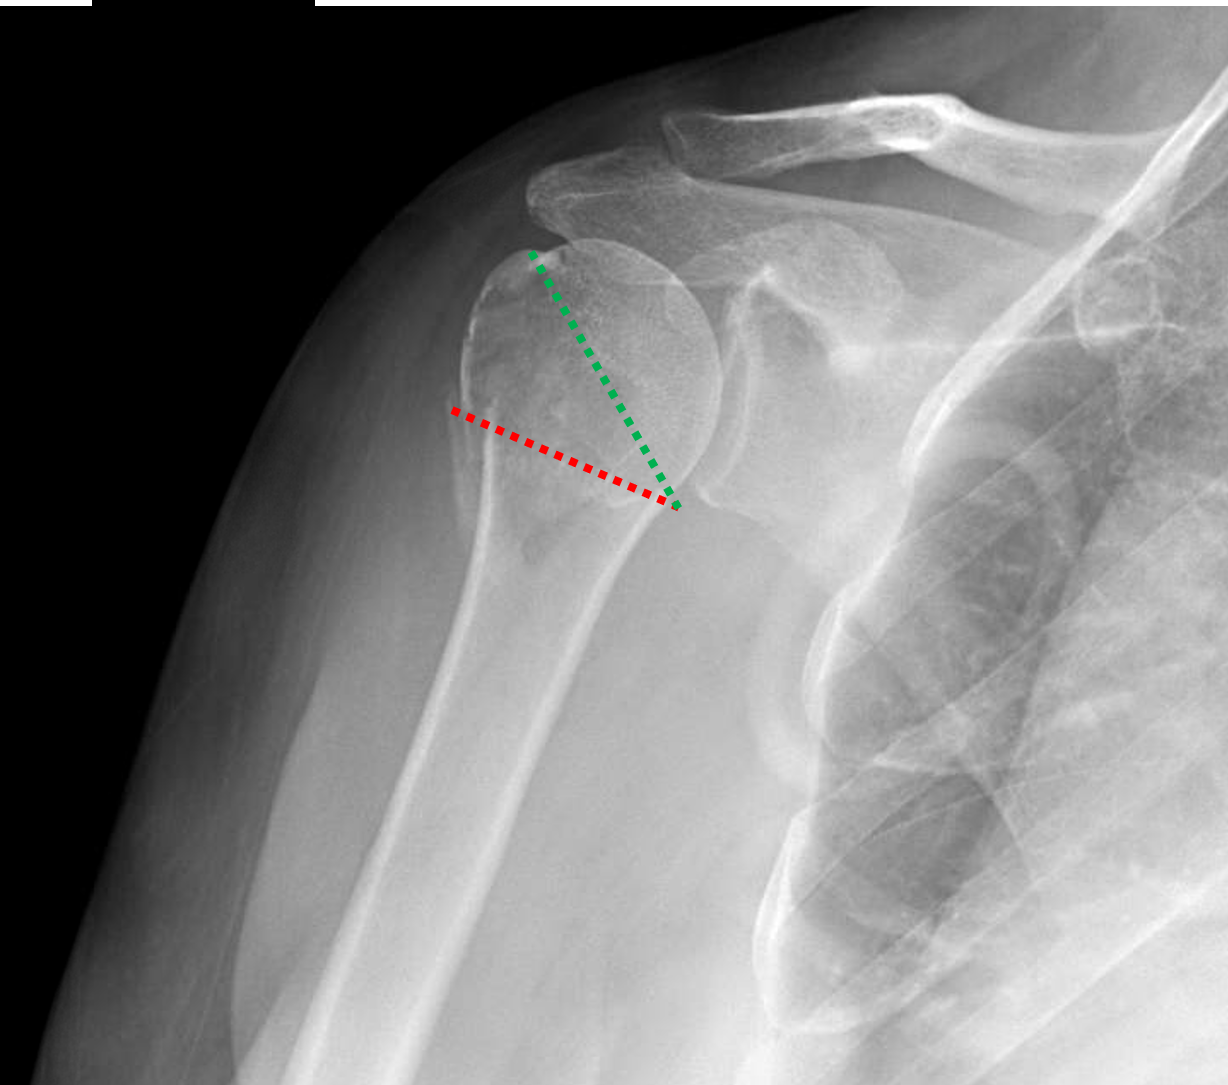 Proximal Humerus Surgical Neck Fracture